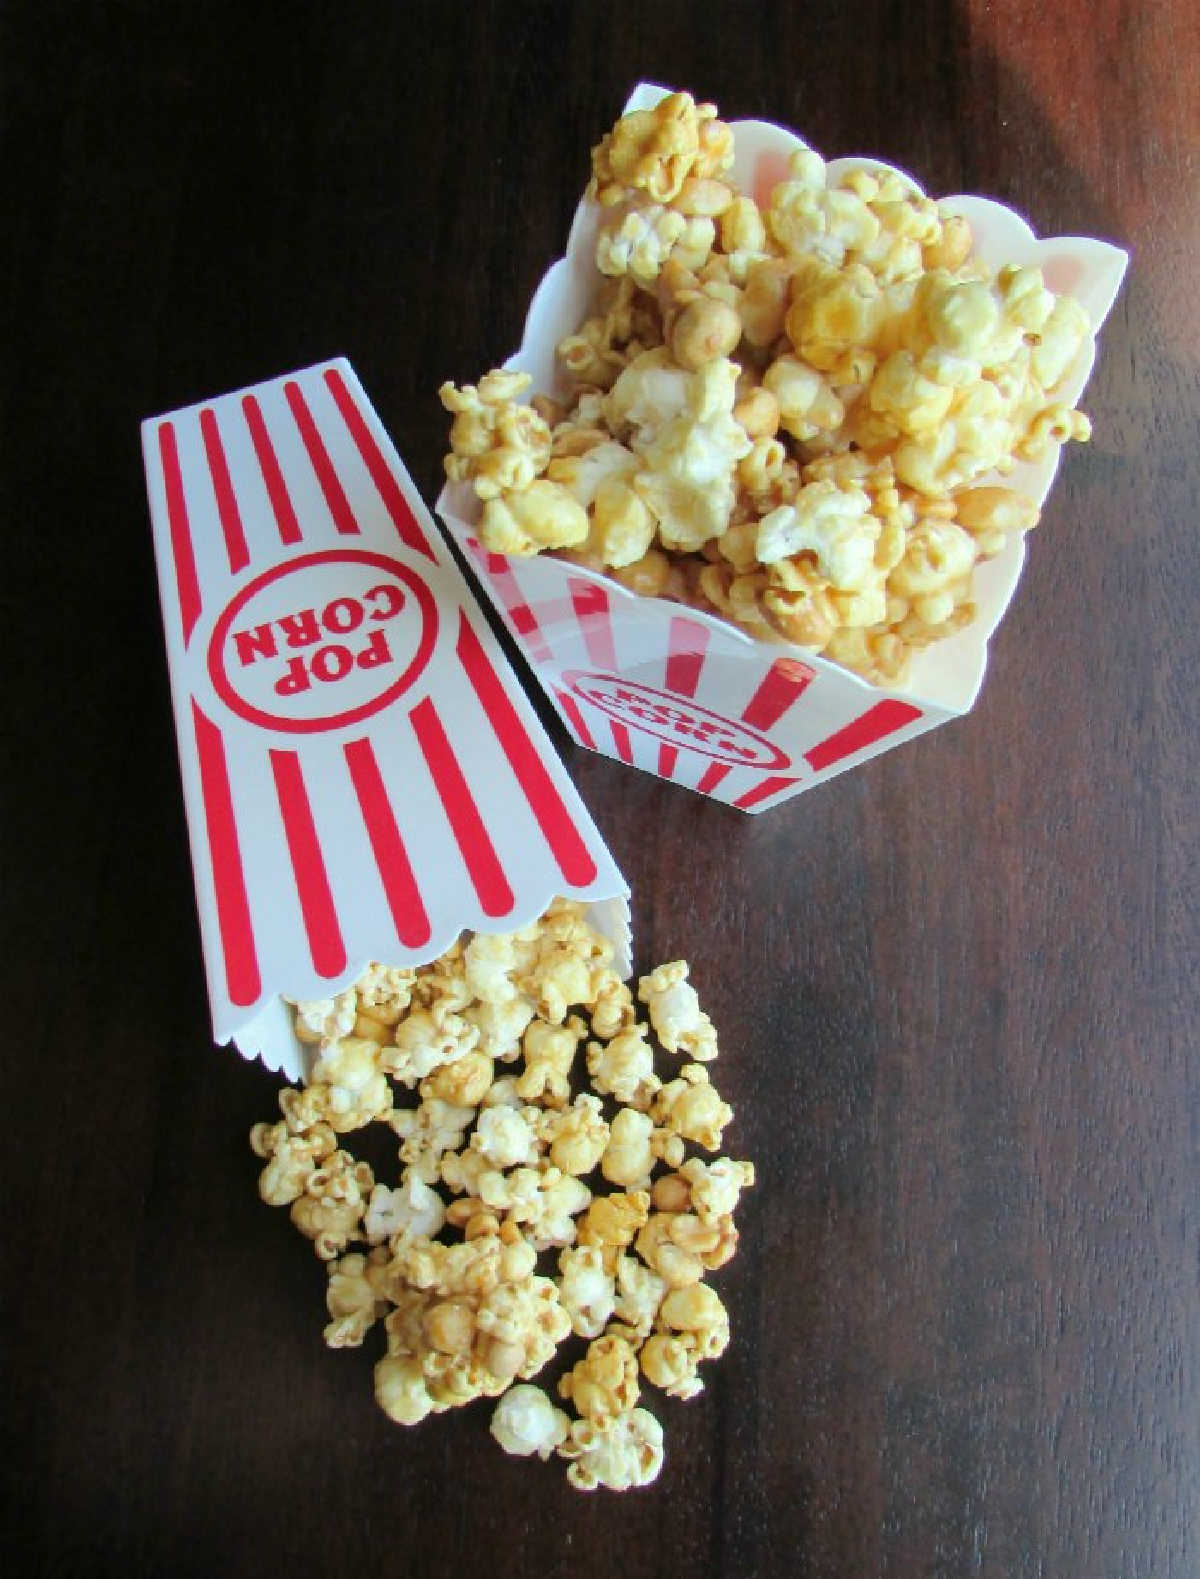 Movie style popcorn containers filled with crunchy microwave caramel popcorn, ready to eat.